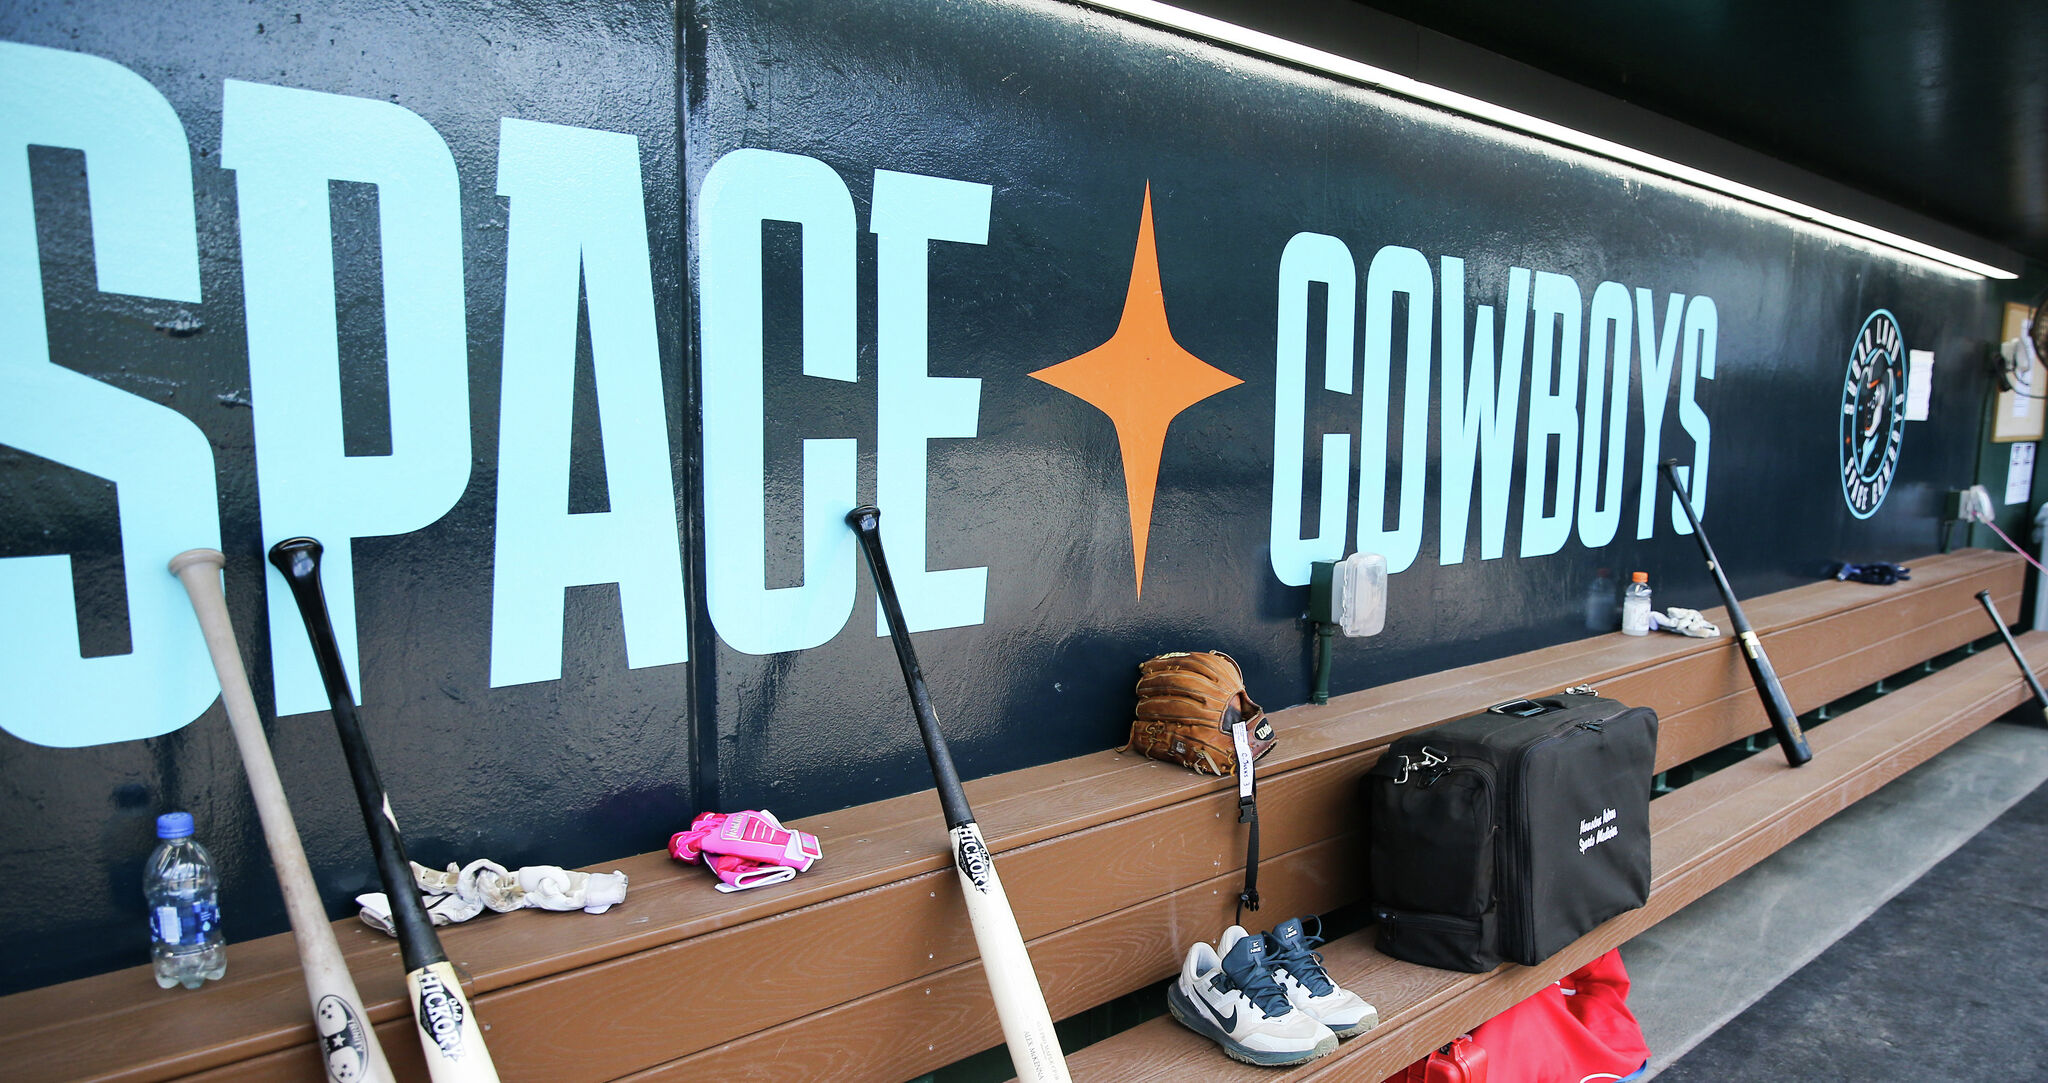 Astros formally roll out Sugar Land Space Cowboys - Ballpark Digest